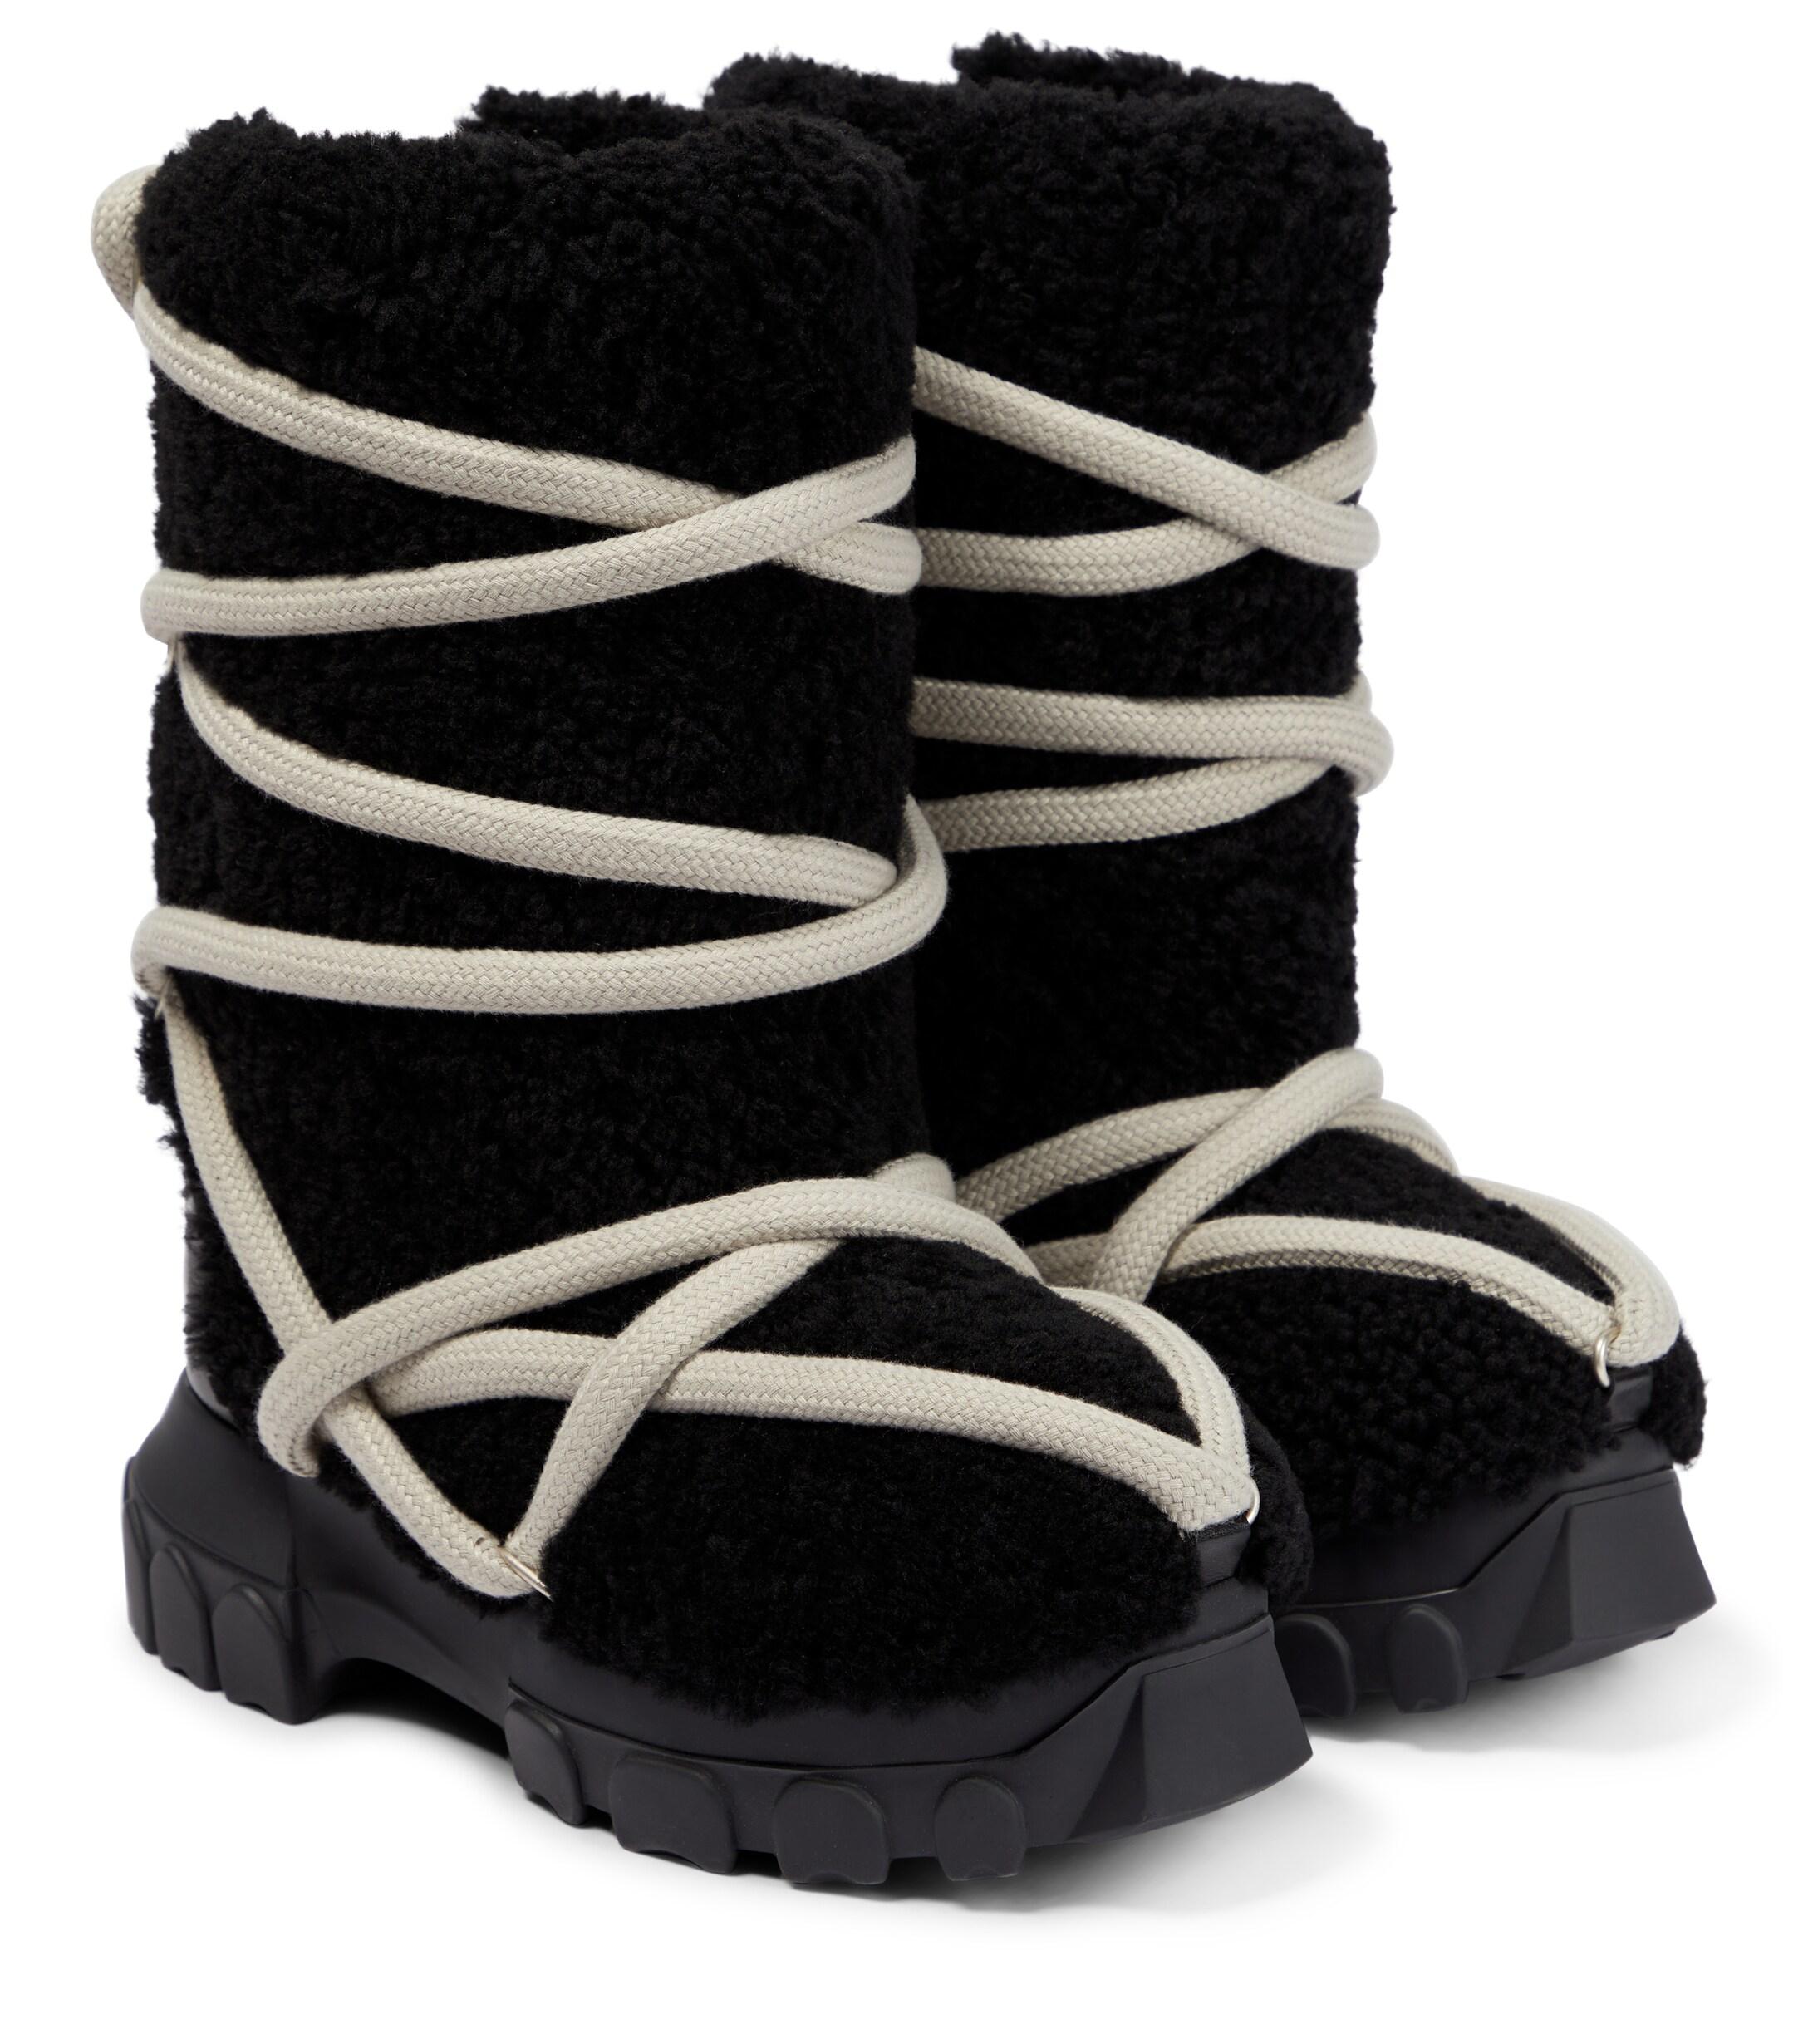 Rick Owens Drkshdw Lace-up Shearling Boots in Black | Lyst Canada